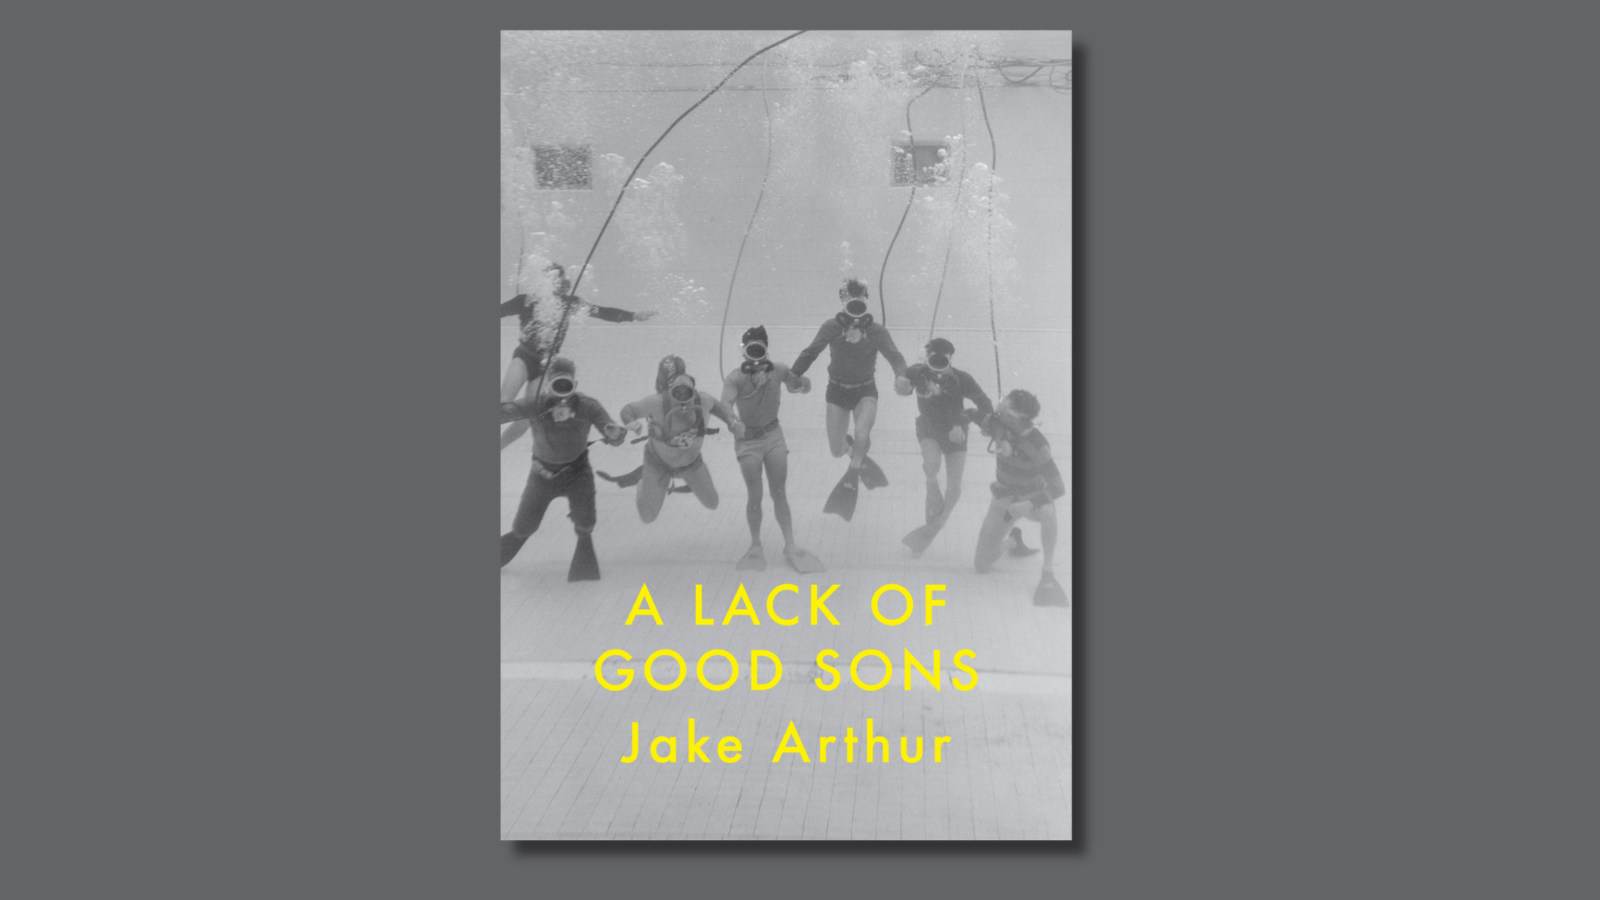 A Lack of Good Sons by Jake Arthur